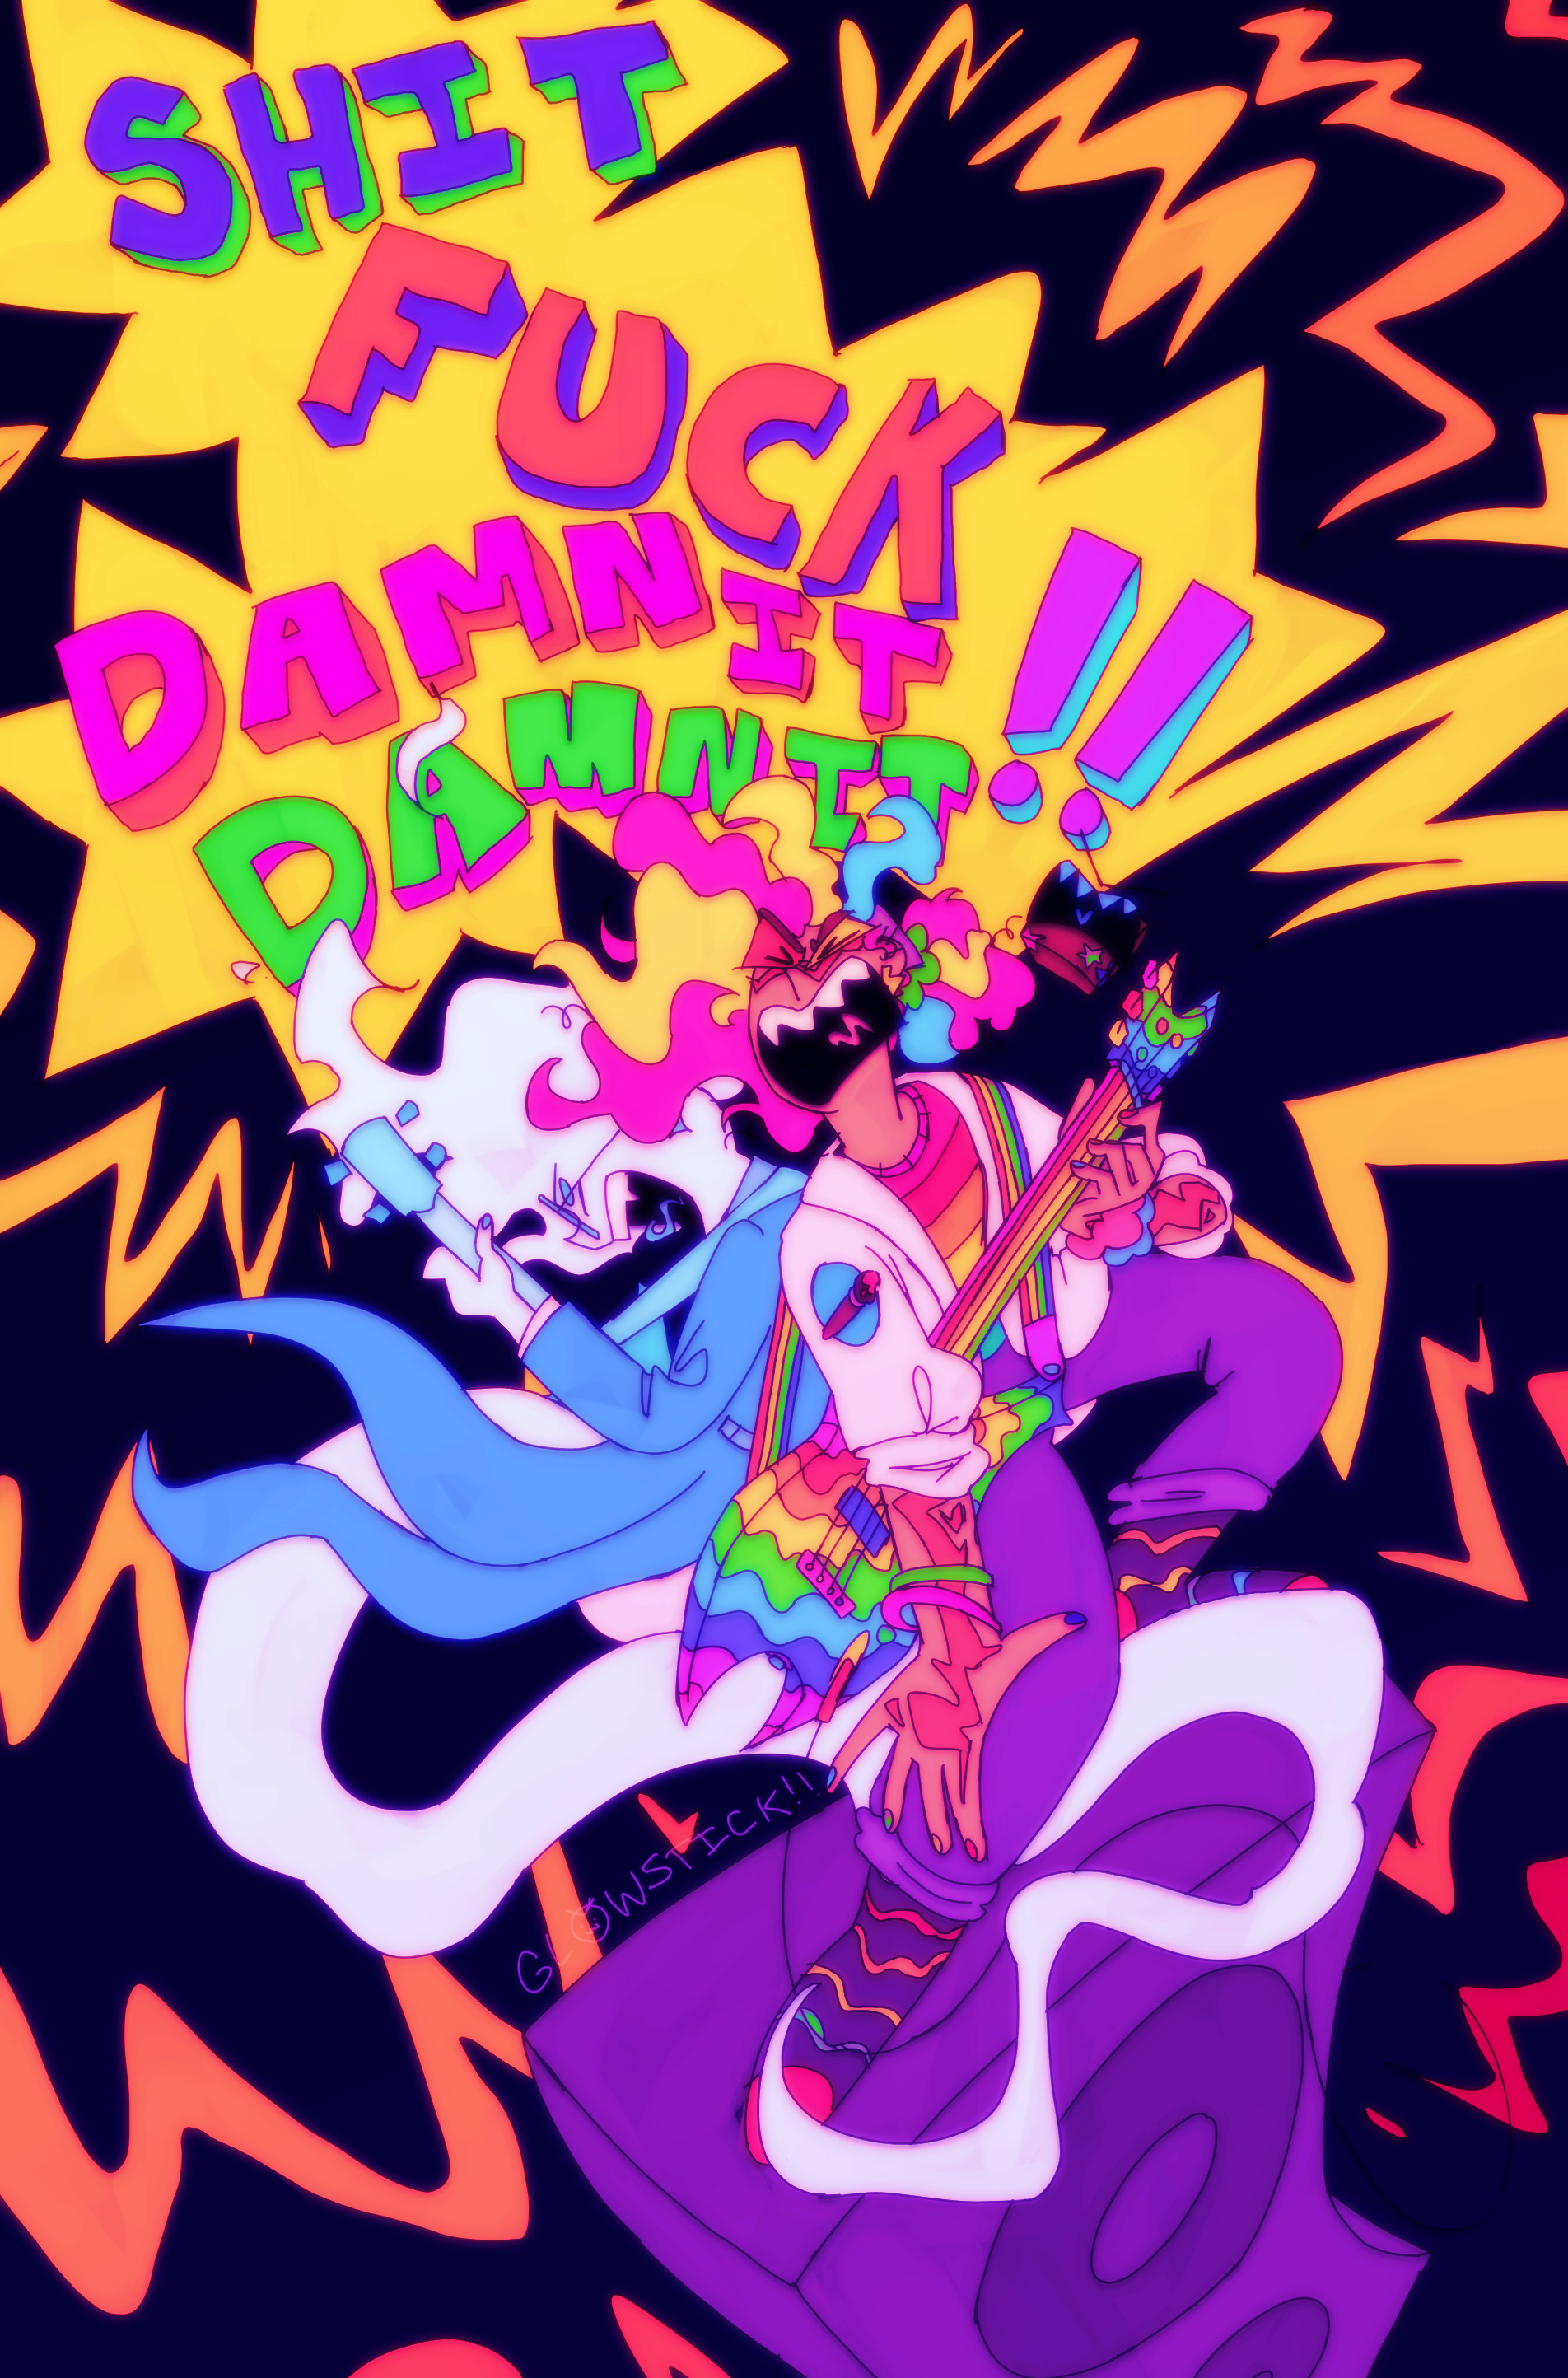 A drawing of Zap, Lizzie, and Sparkplug on top of an oversized speaker, shouting the words, 'Shit, Fuck, Damnit, Damnit!'. Lizzie is holding a blue bass guitar, while Zap is holding a melty rainbow-colored guitar and Sparkplug floats above his shoulder. The background is solid black, with yellow and orange shockwaves coming off of the trio's speech bubble.